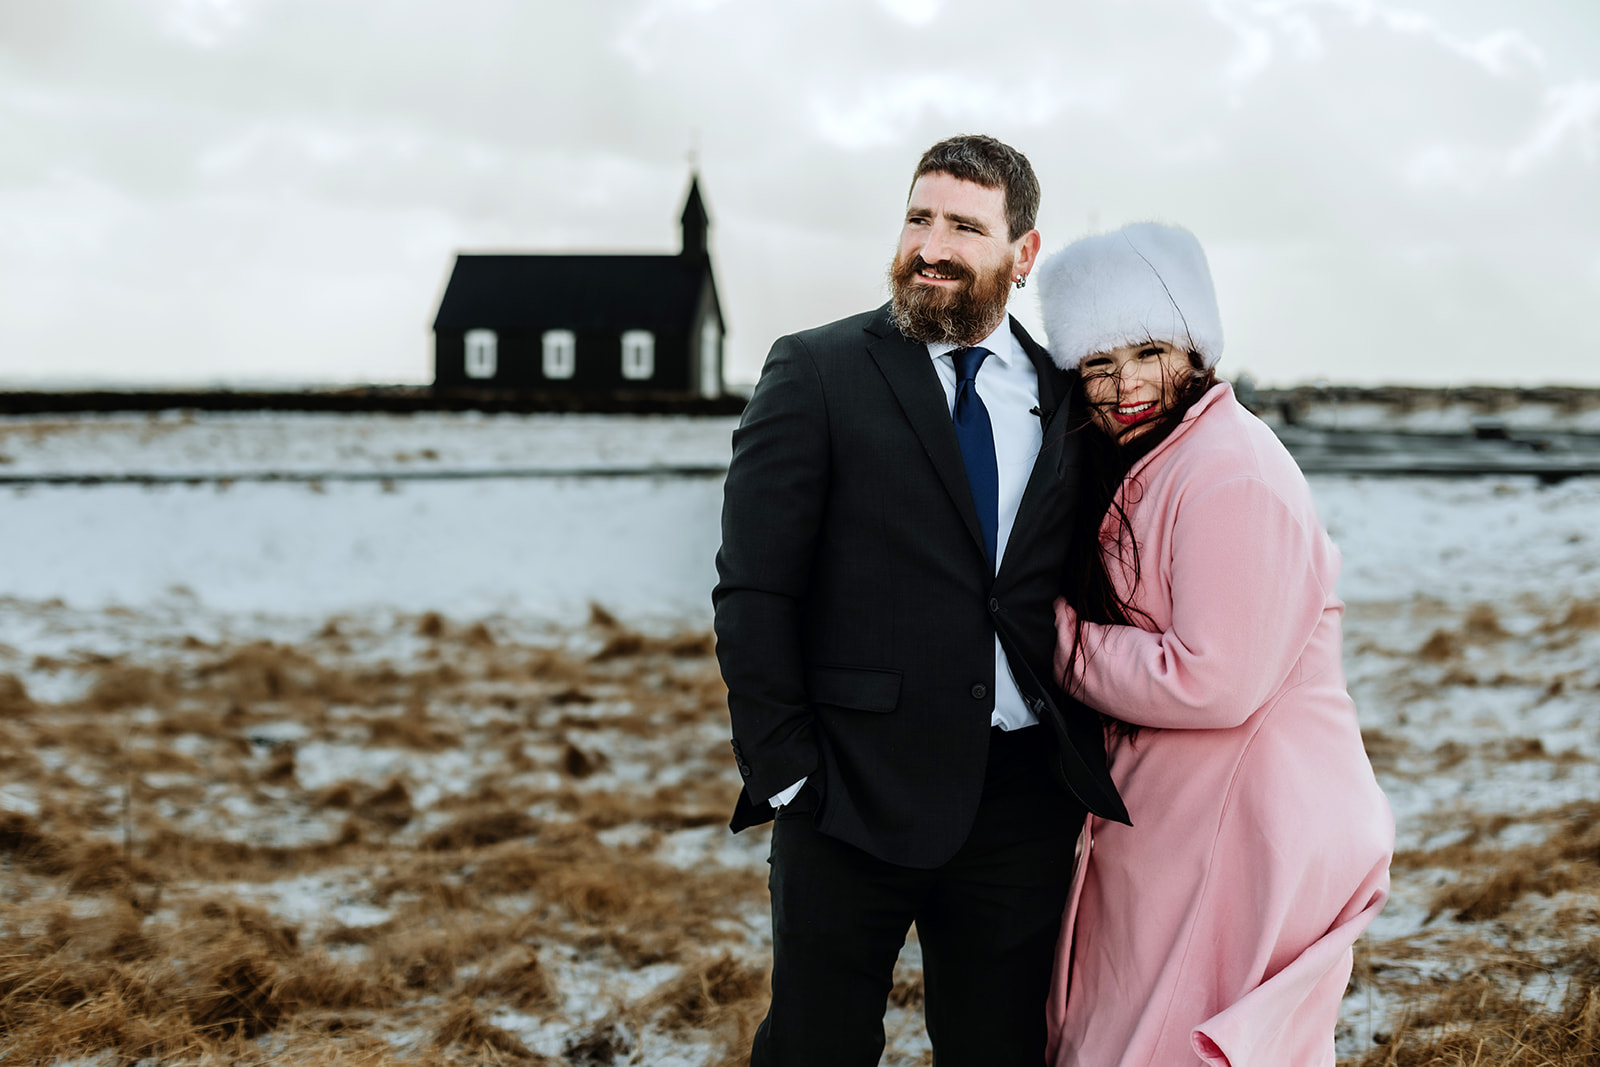 Married couple is walking back to the hotel after their wedding ceremony in Iceland